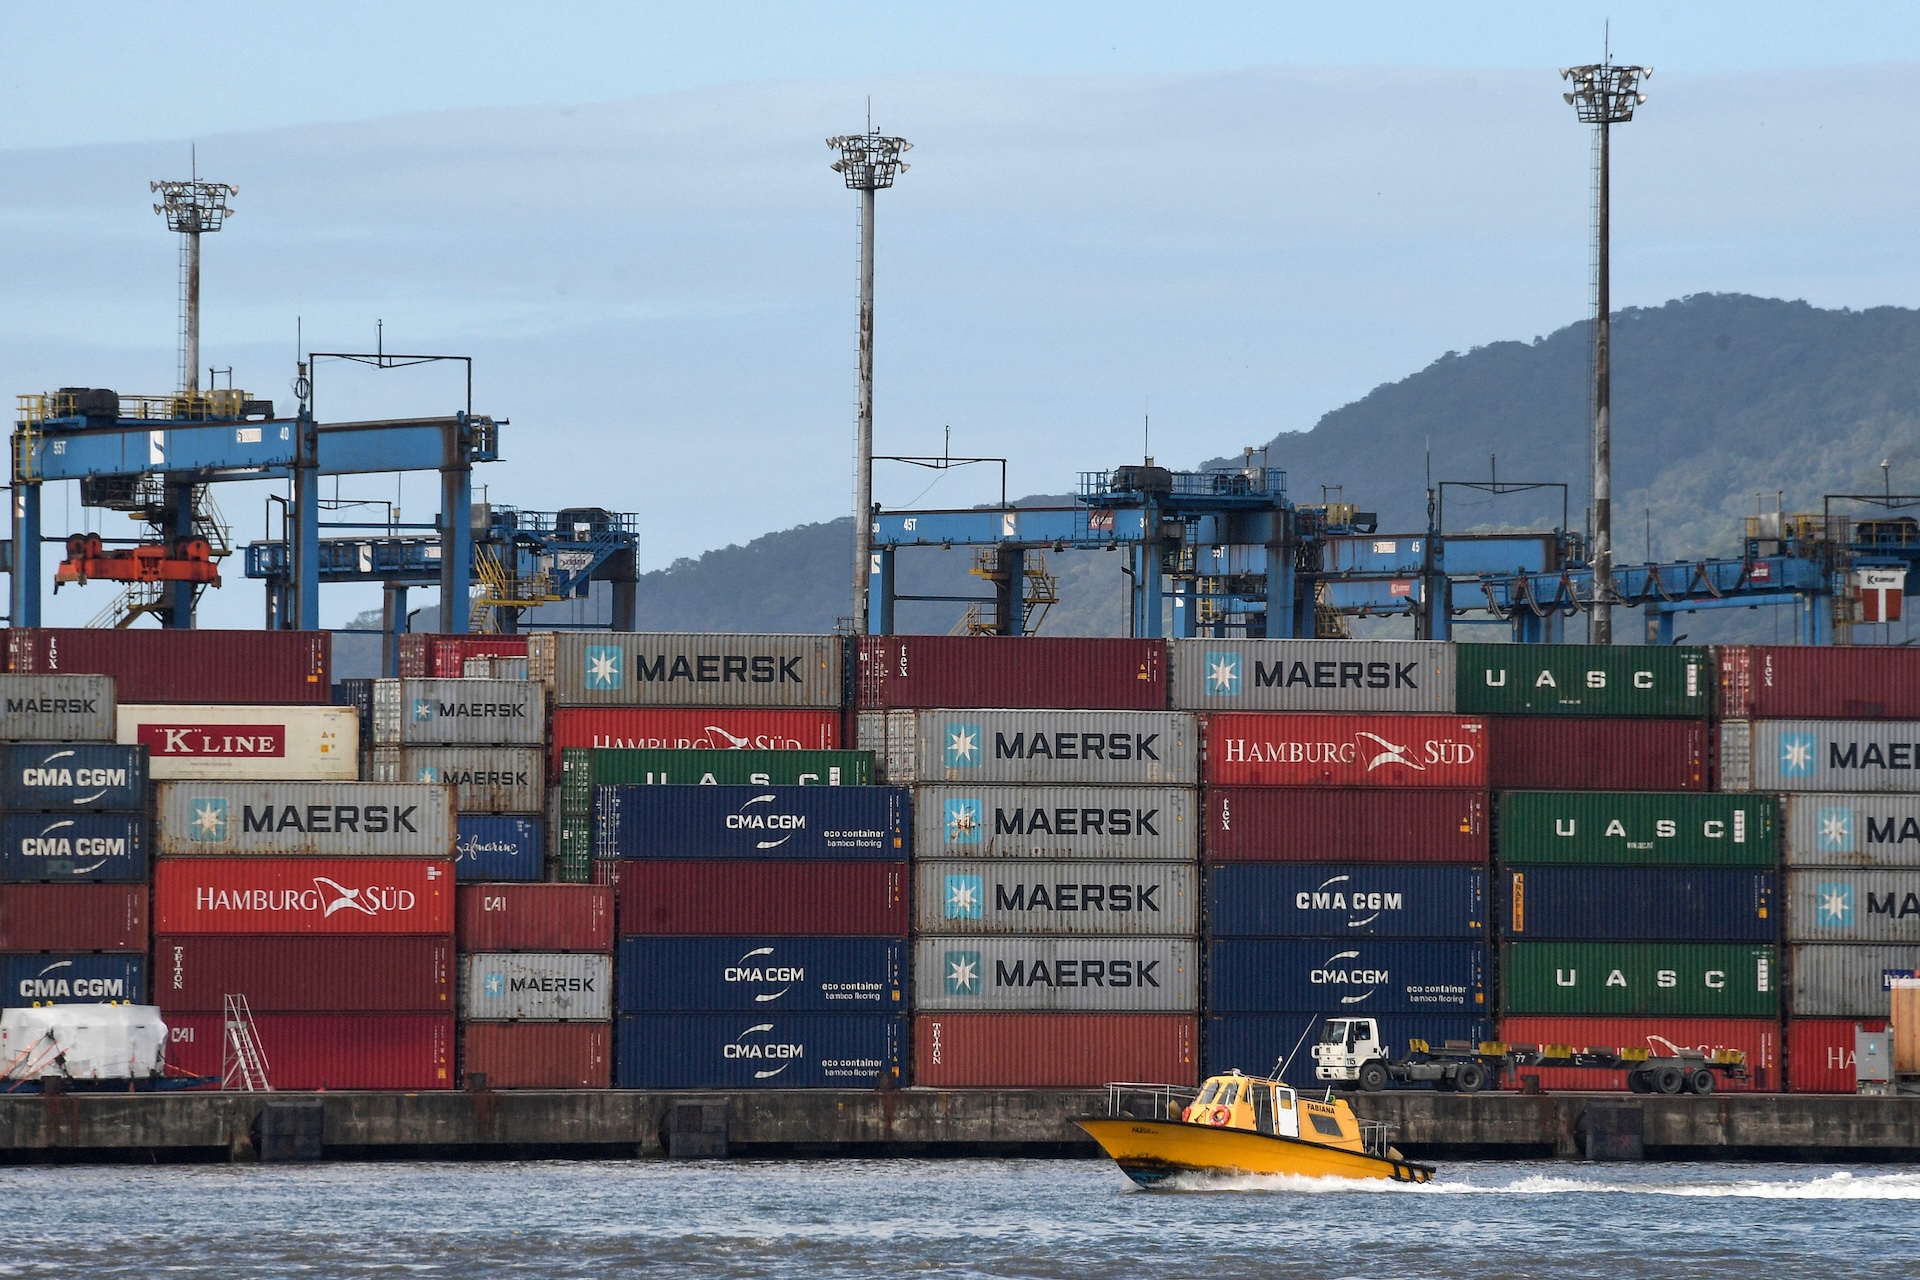 Brazil: Cocaine Exports from Santos Port at All-Time High